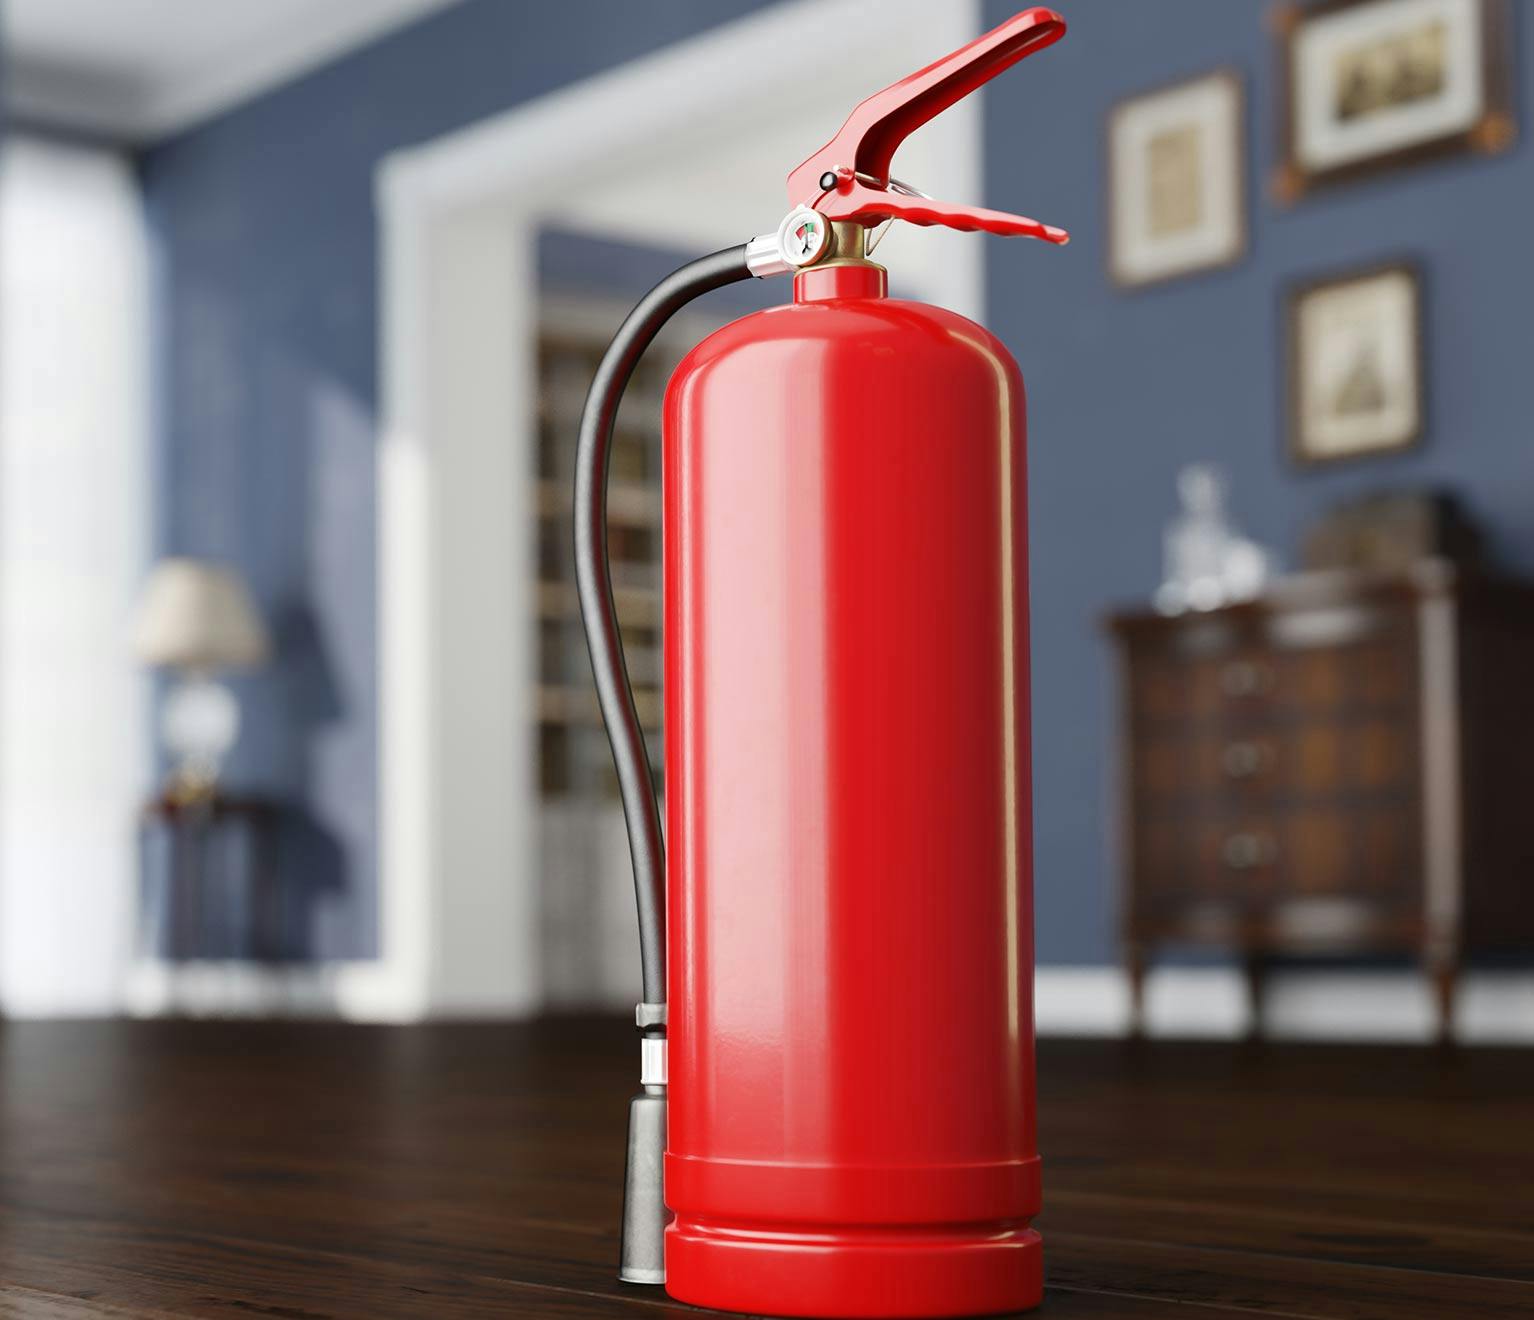 Image of a fire extinguisher in a living room.